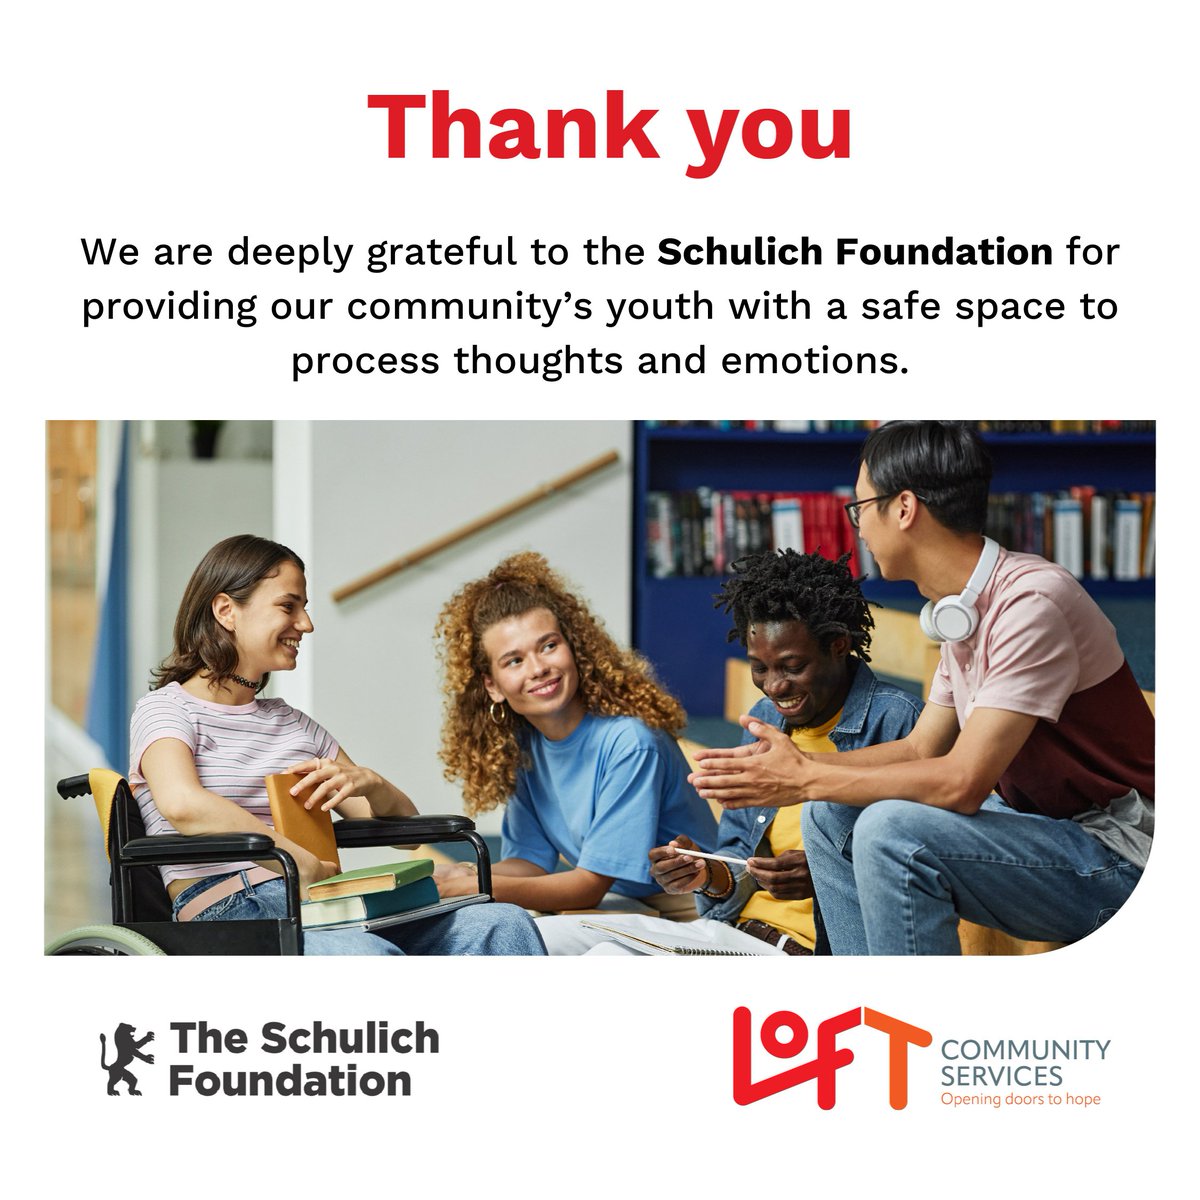 A big thank you to the Schulich Foundation for investing in our Dialectical Behavioural Therapy (DBT) Youth Programs. Together, we can connect more youth with a safe space to process thoughts and emotions and empower them on the path to independence. #ThankfulThursday